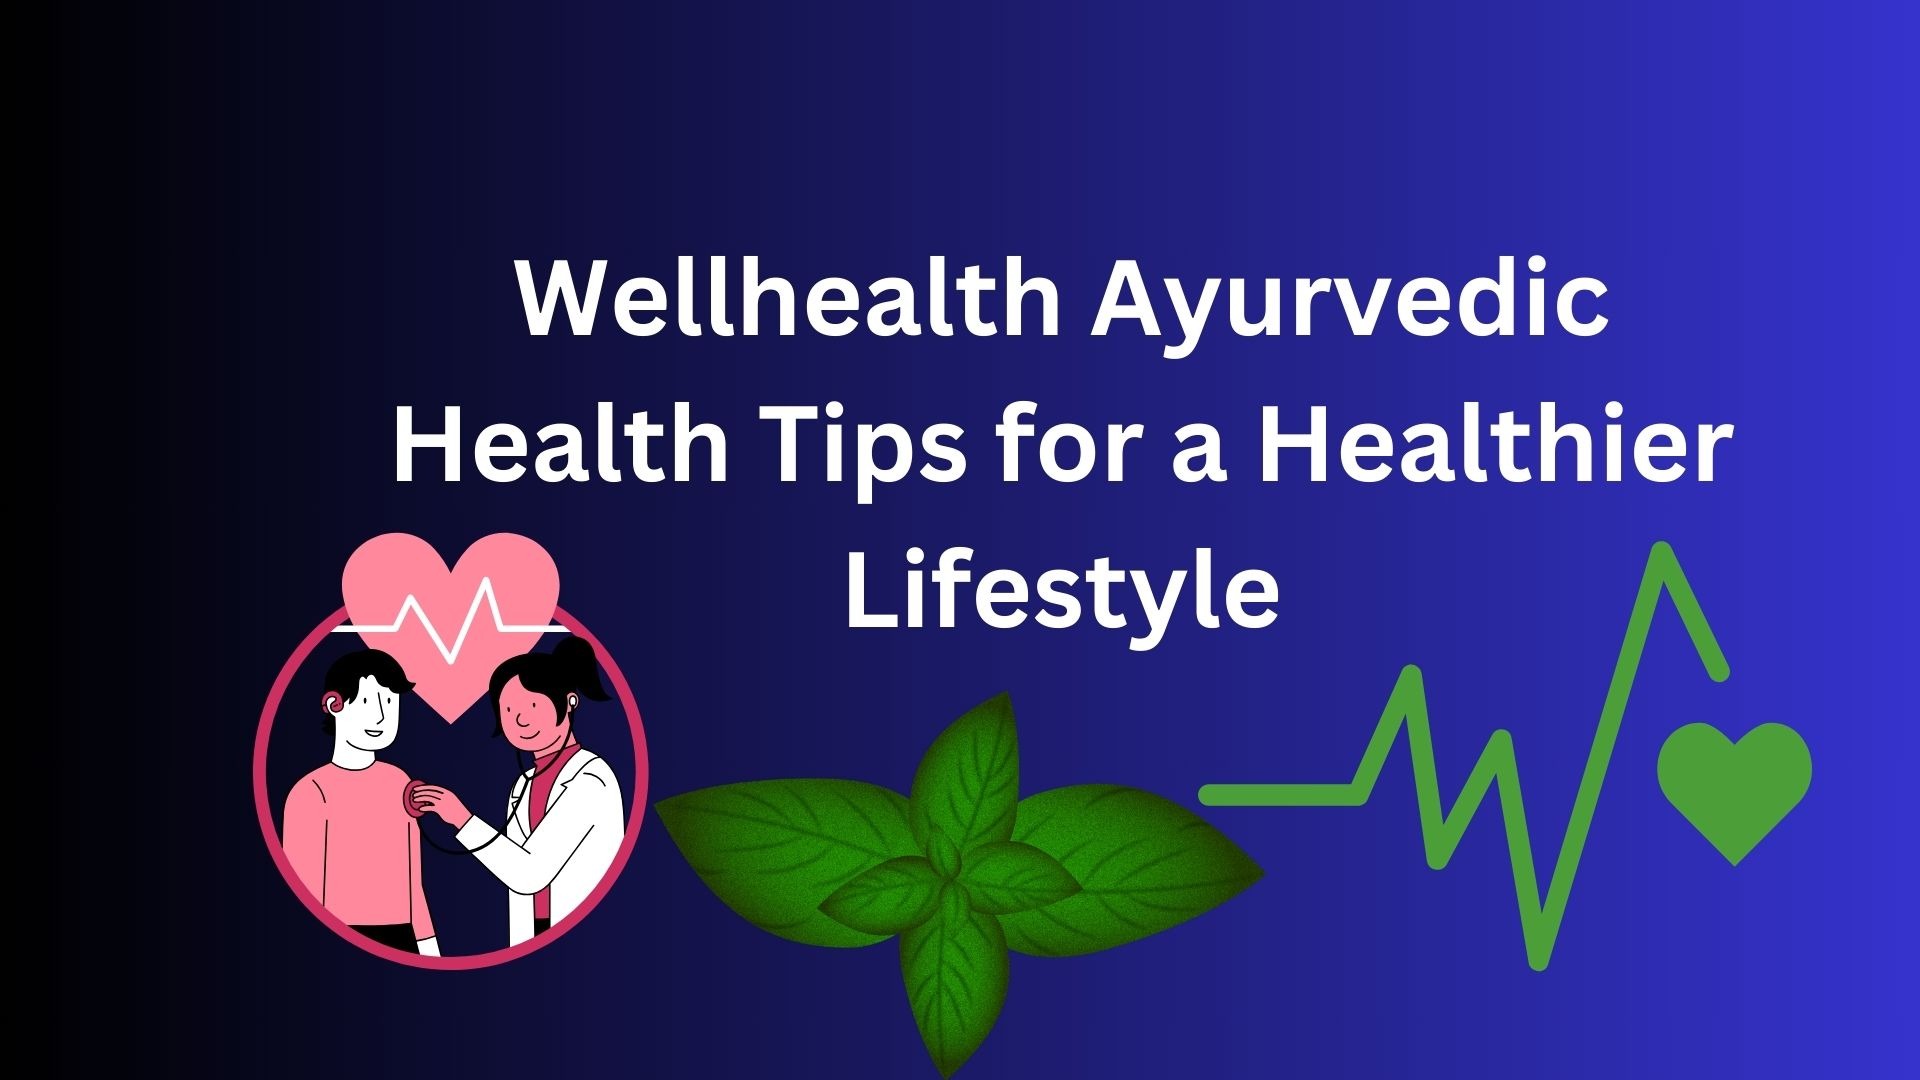 Top 10 Wellhealth Ayurvedic Health Tips for a Healthier Lifestyle